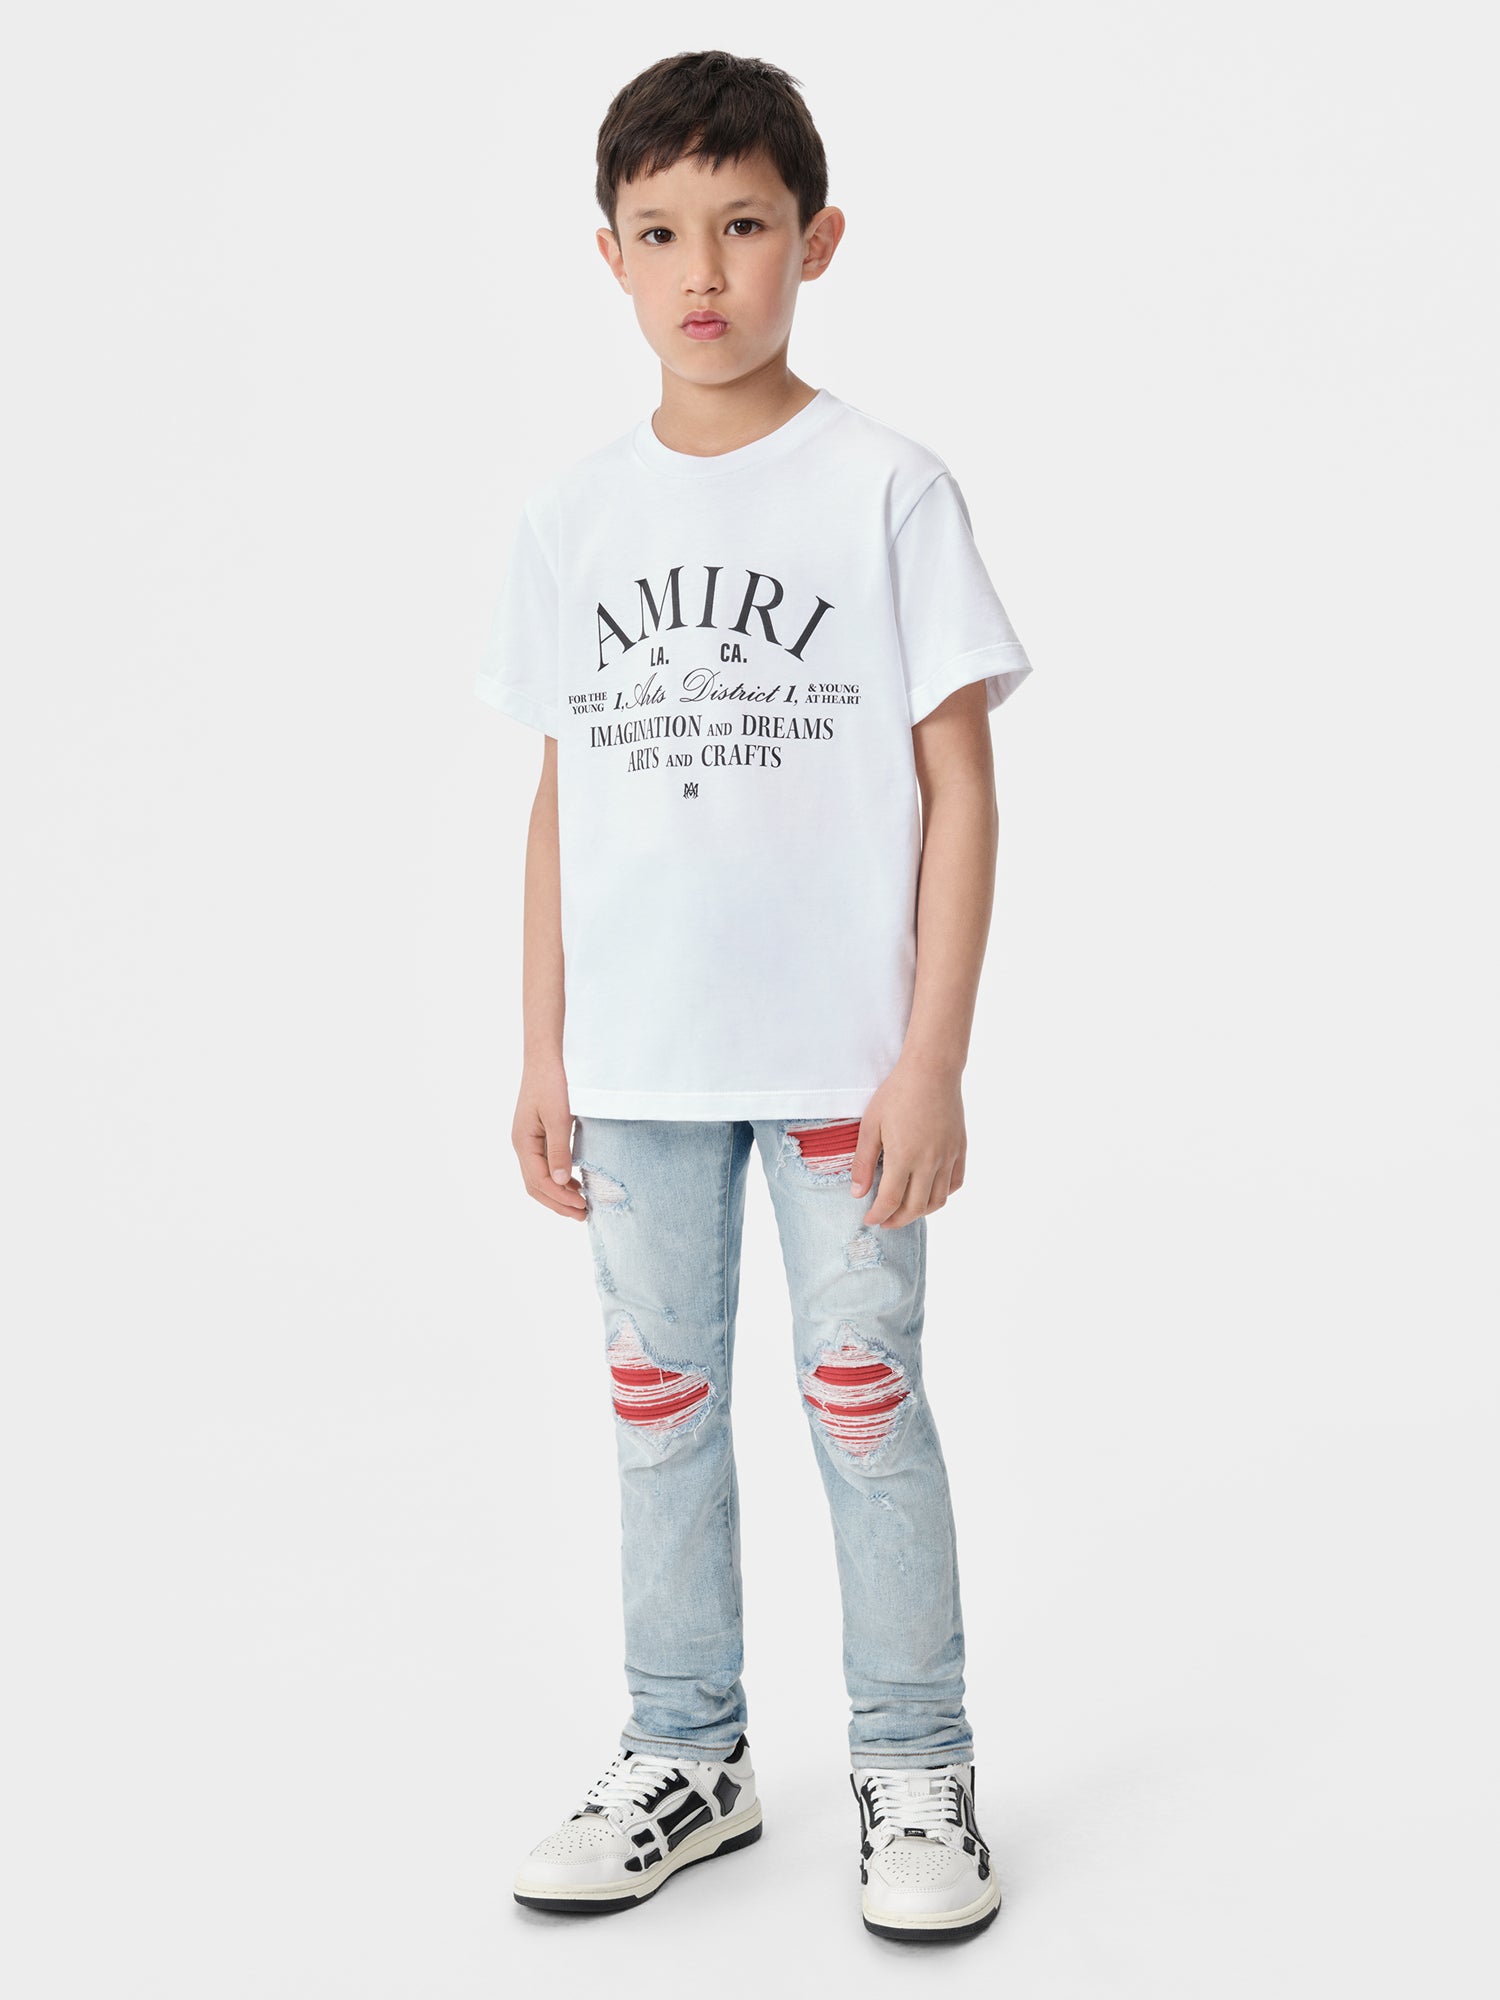 Product KIDS - KIDS' MX1 - Red featured image